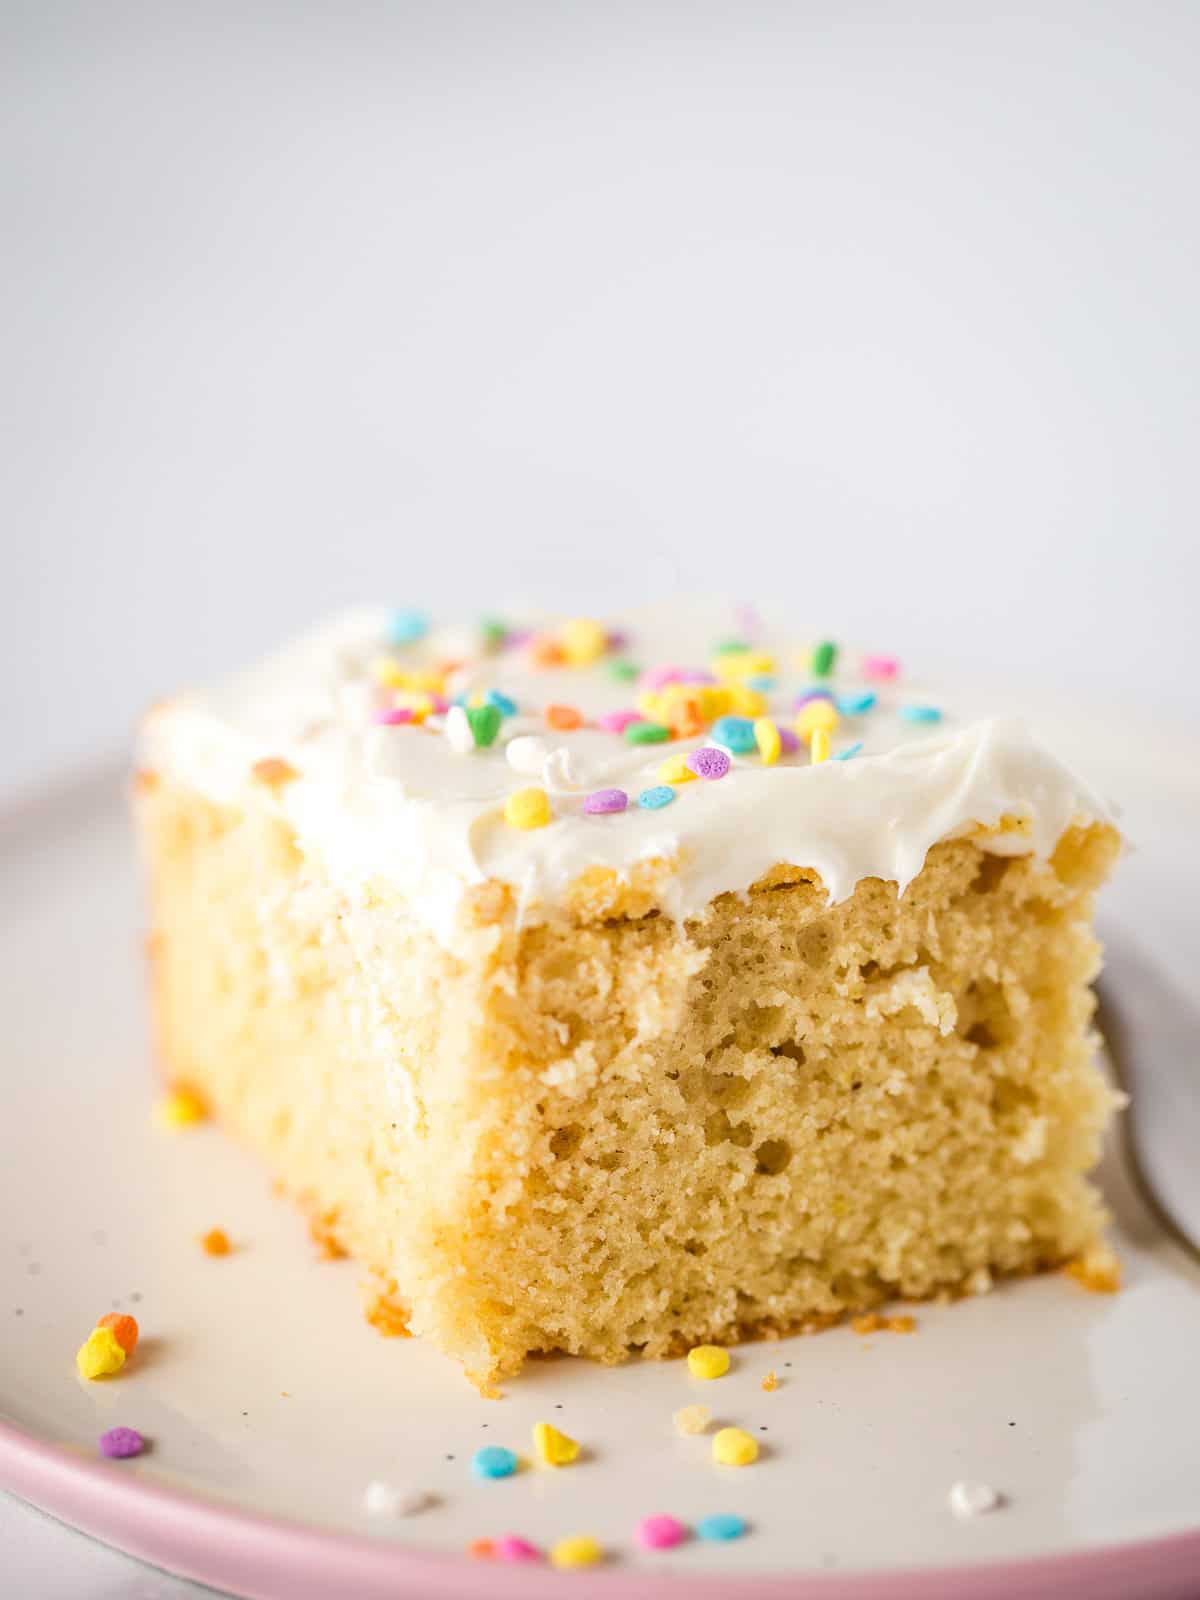 A slice of gluten-free sheet cake on a plate. The cake is frosted with vanilla frosting and sprinkles.